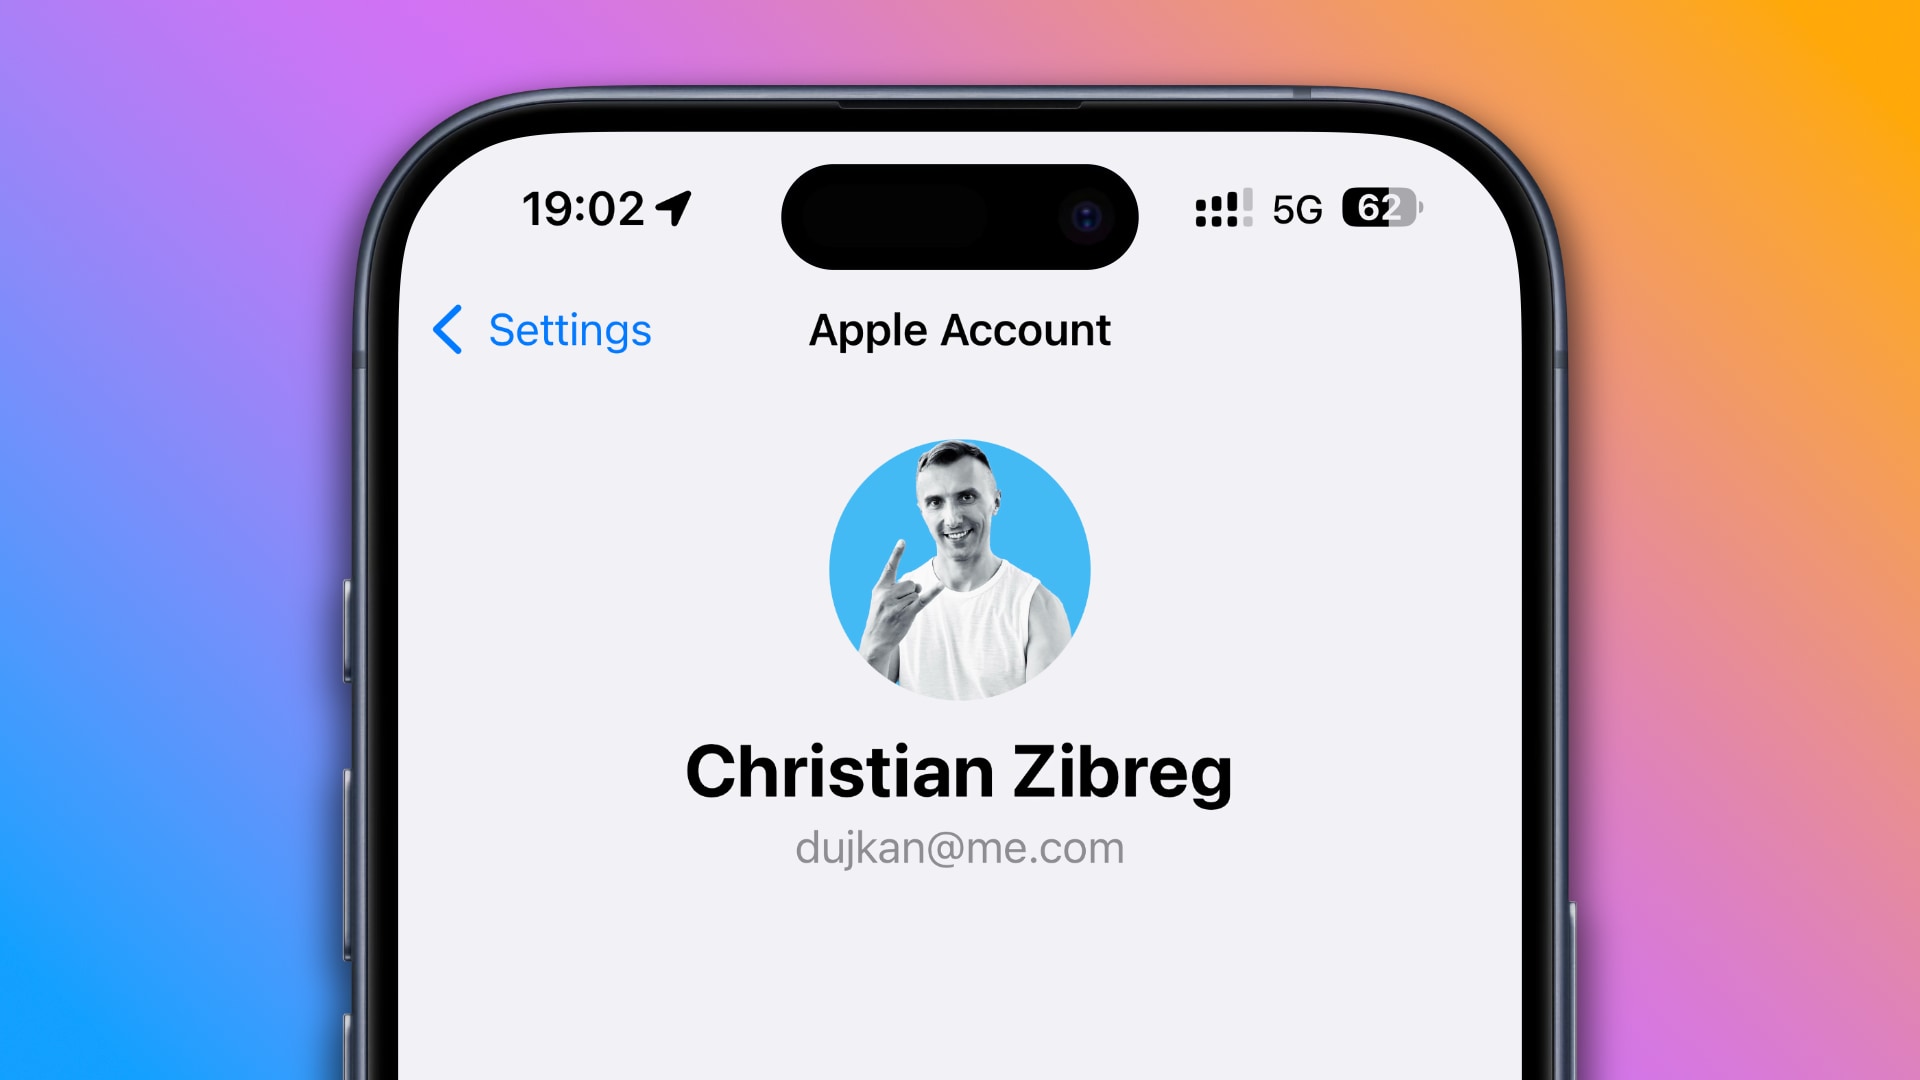 The Apple Account section in the iPhone's Settings app on iOS 18